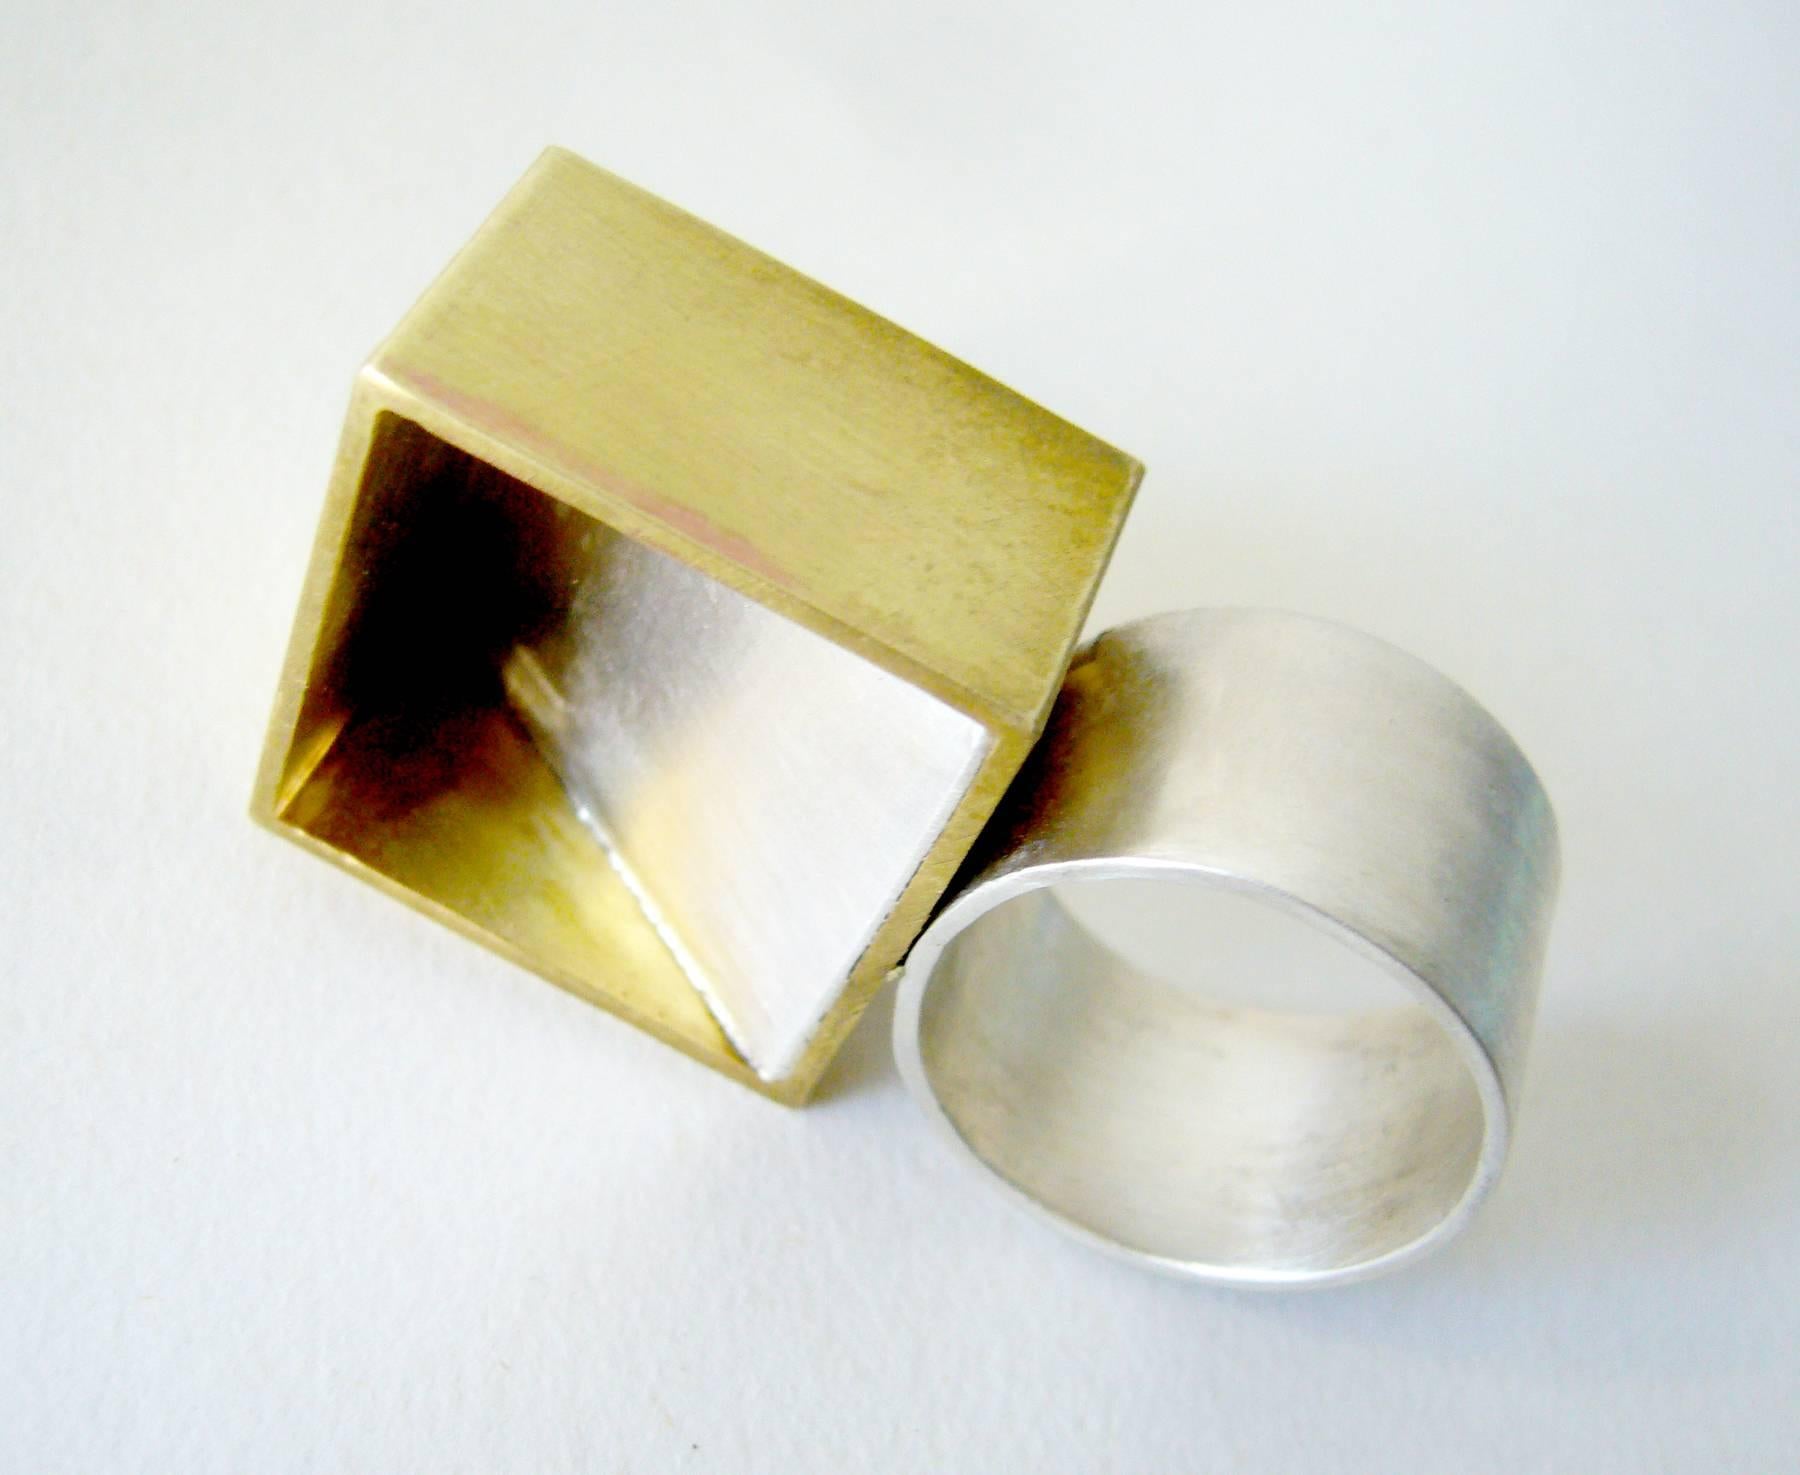 Geometric modernist sterling silver and brass ring created by Heidi Abrahamson of Phoenix, Arizona.  Ring features a brass square and a piece of slanted sterling silver within creating a shadowbox effect.  It sits about 1